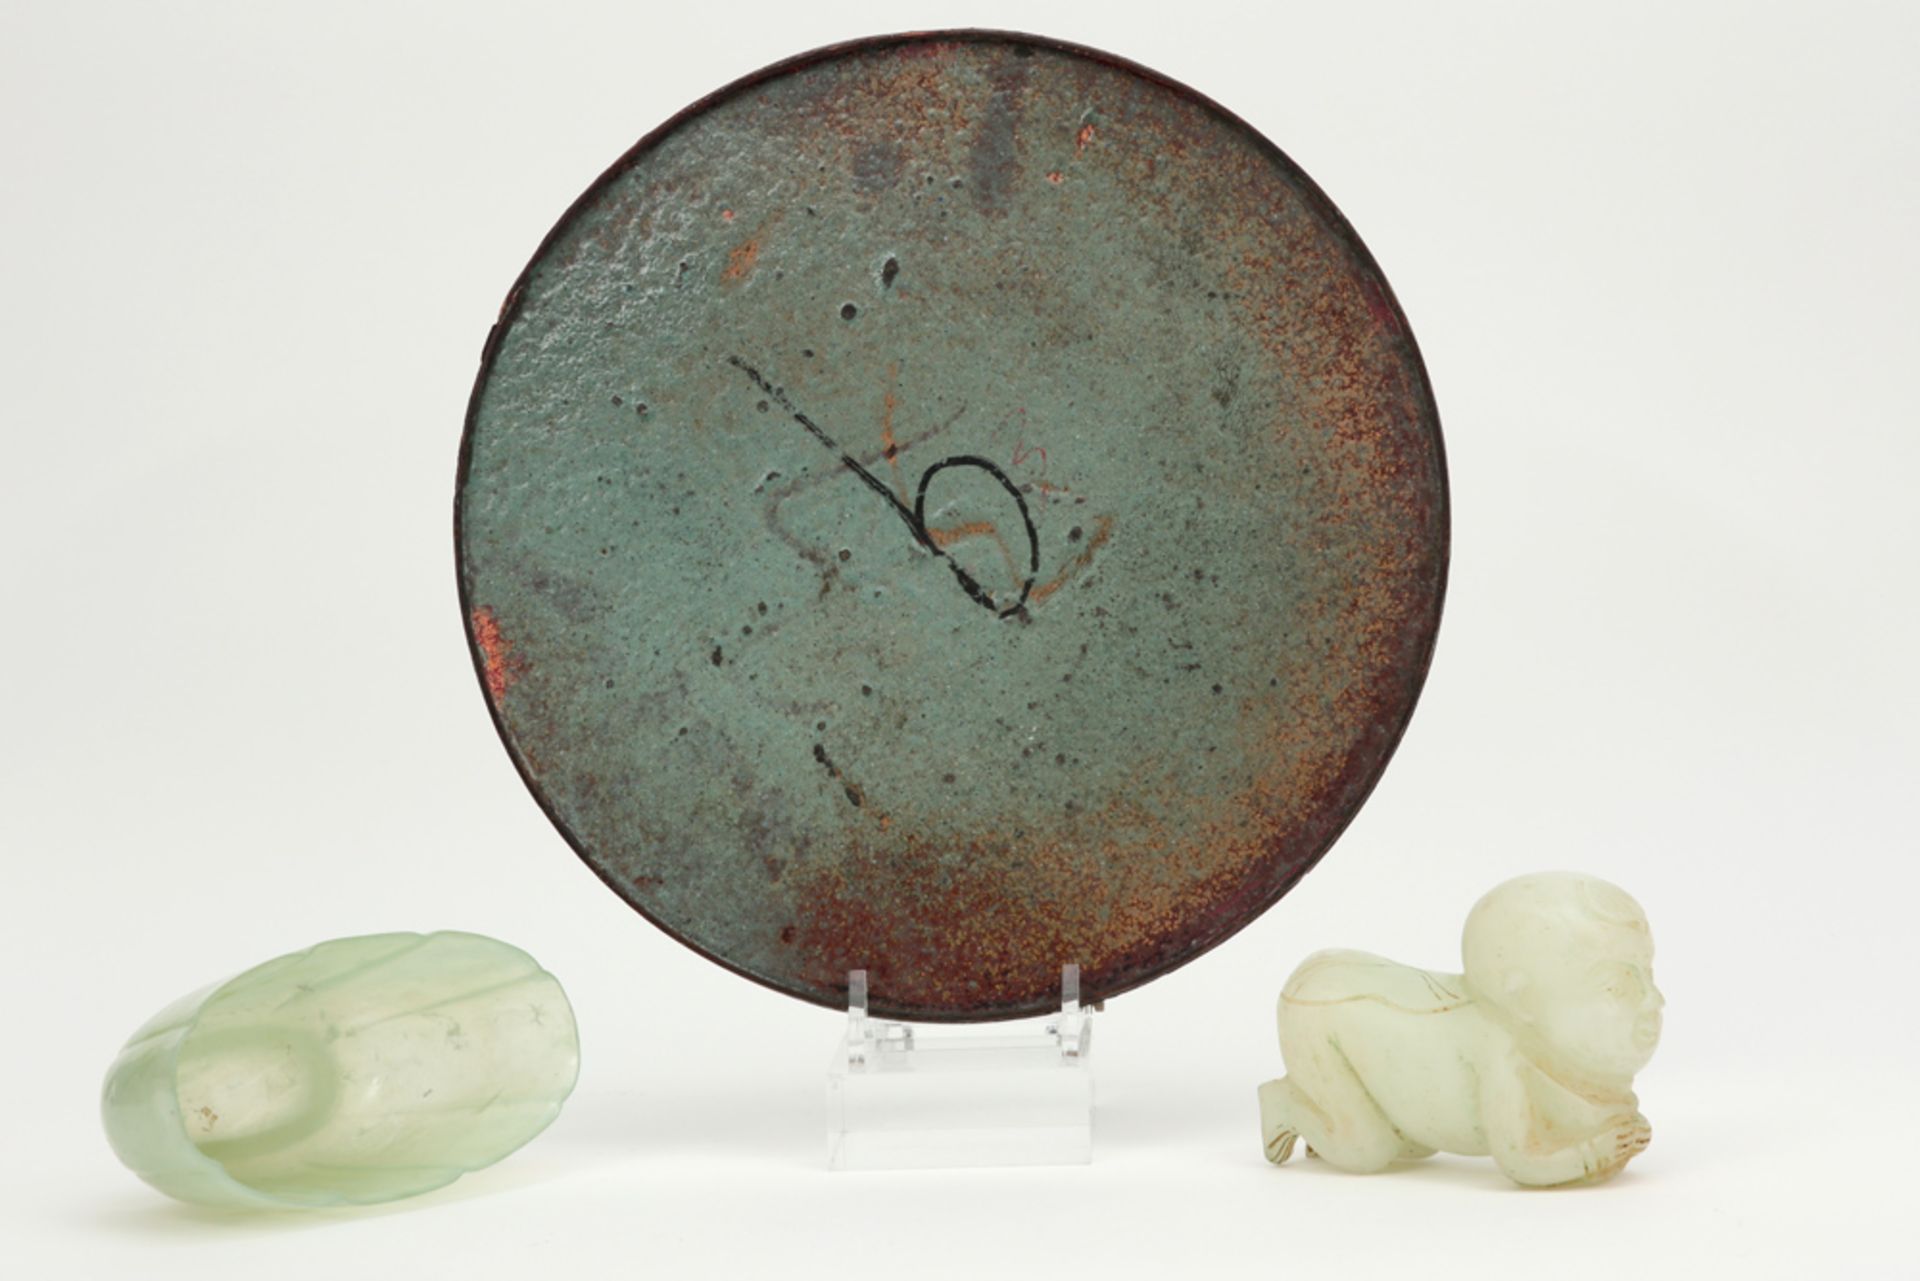 two Chinese jade pieces (bowl and baby figure) and a round cloisonné plate || Lot (3) met een kom en - Image 2 of 4